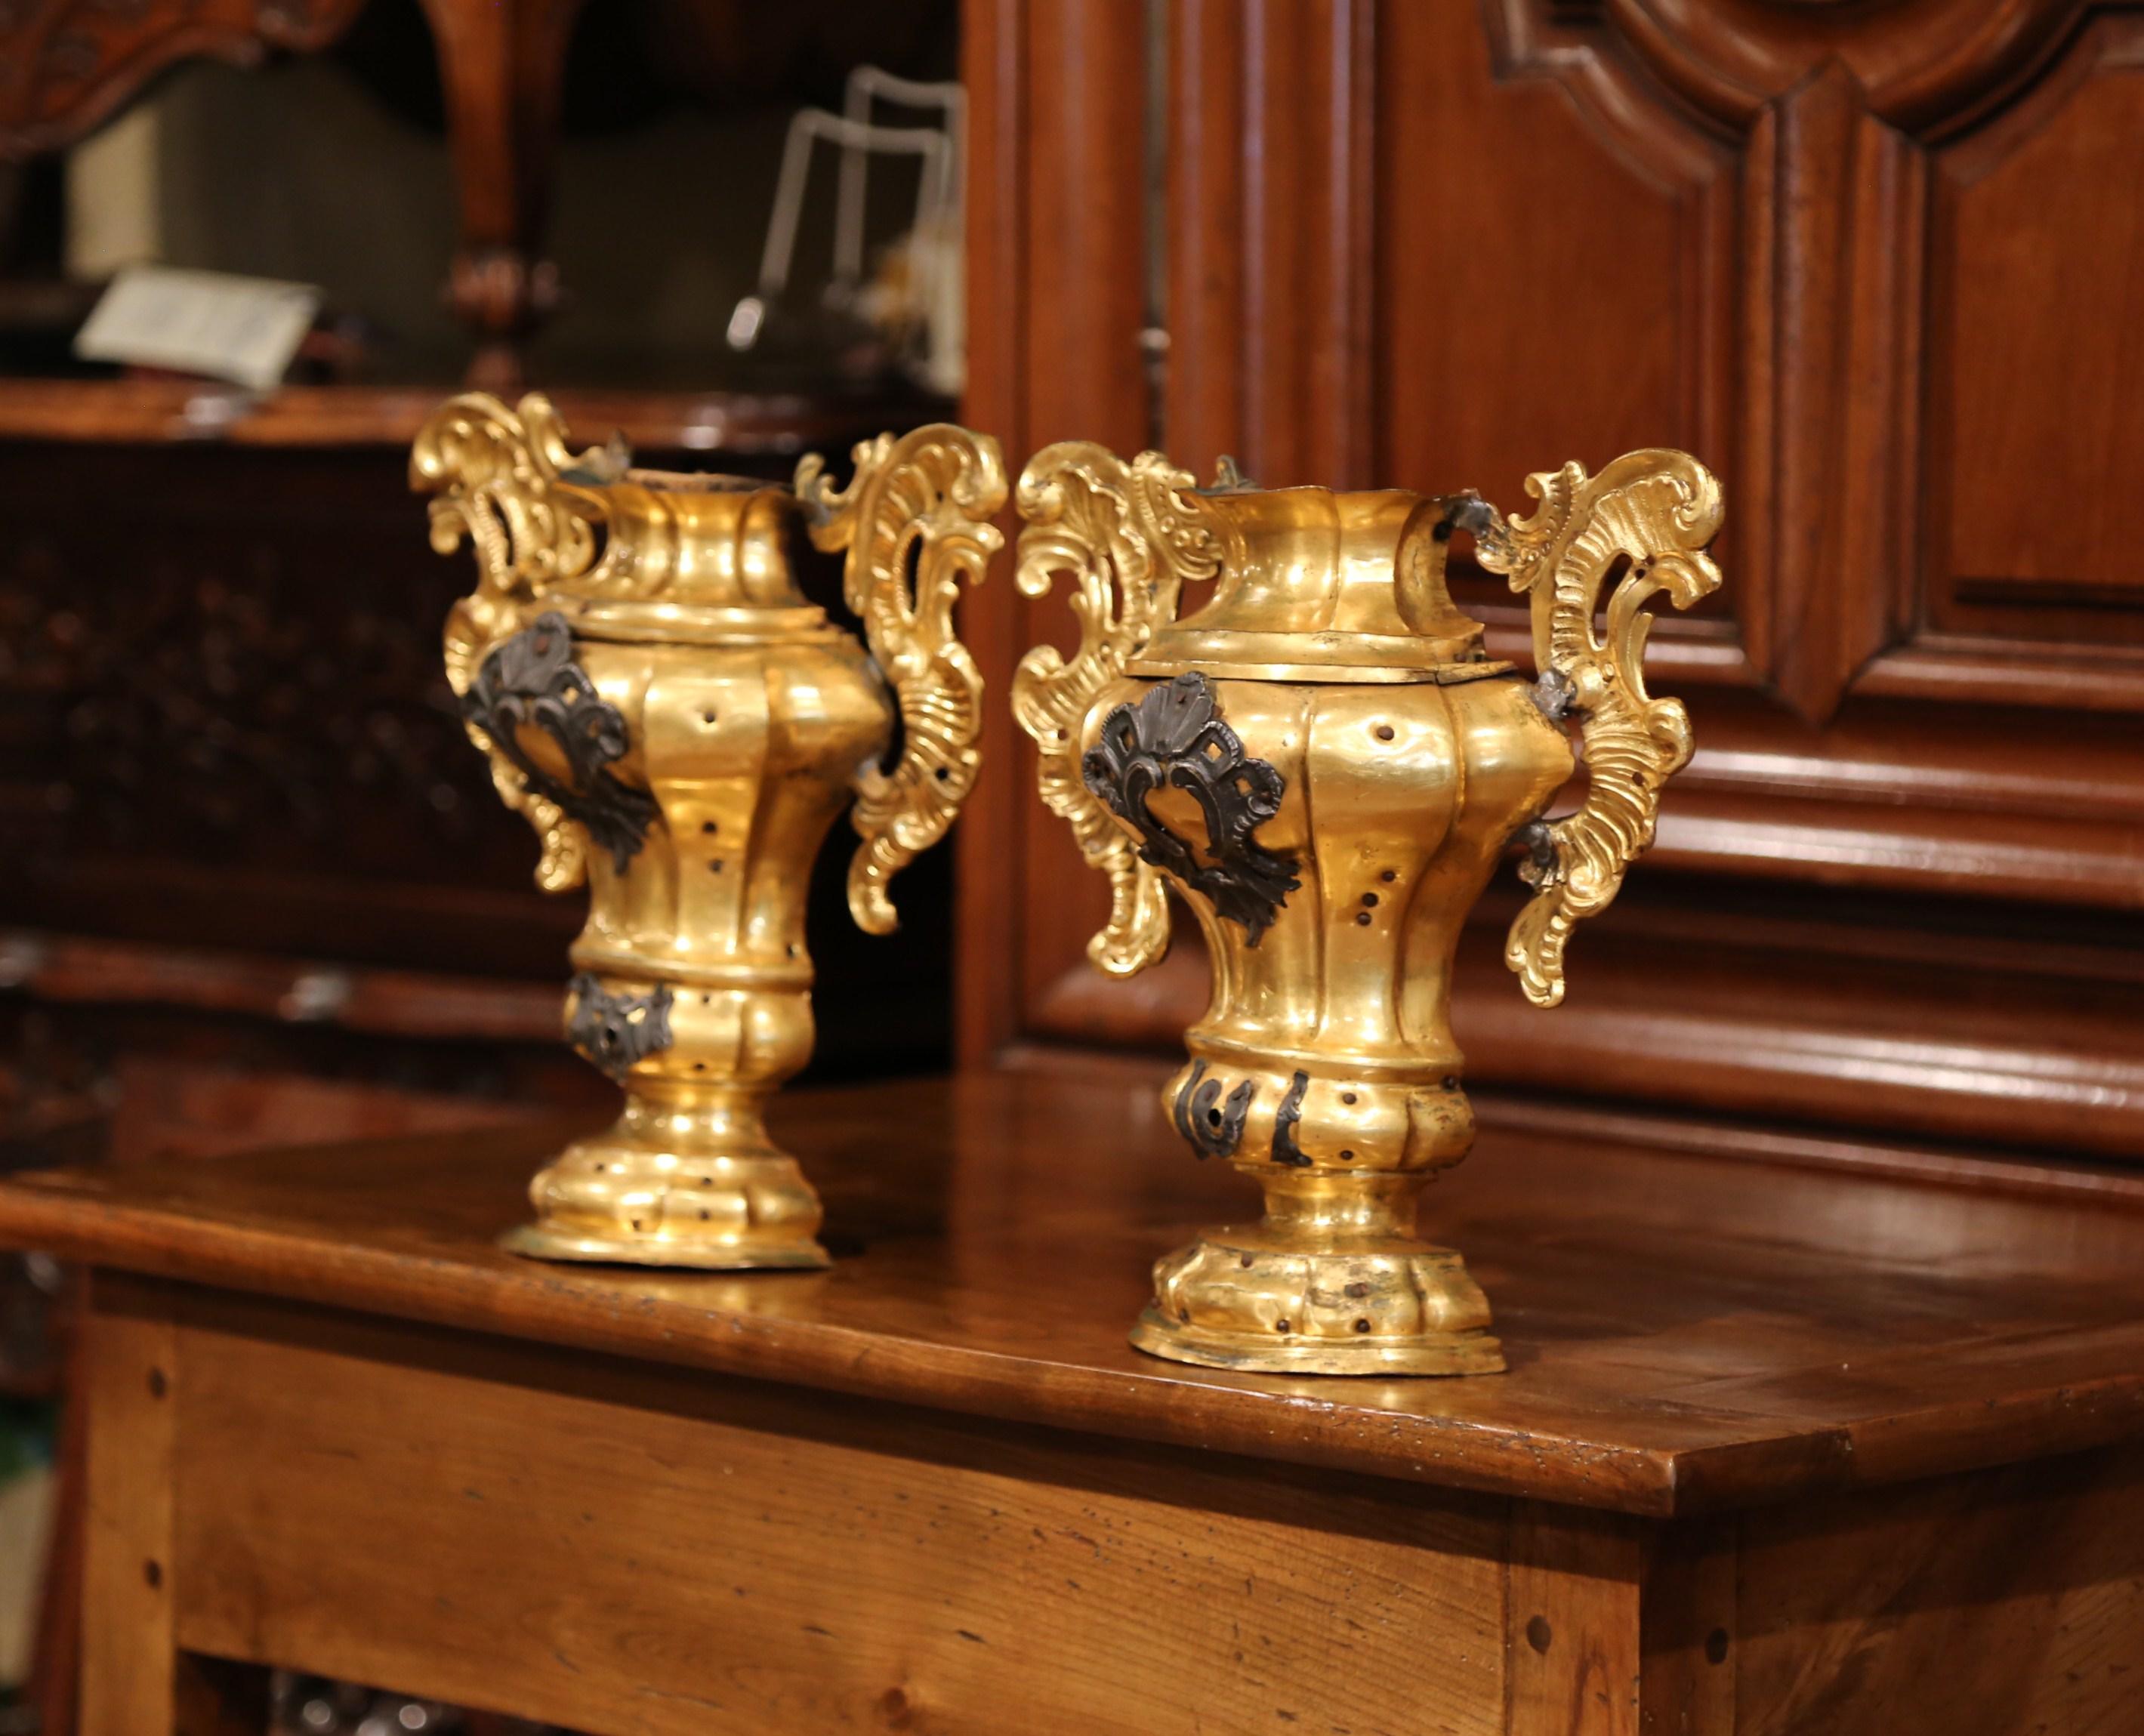 Crafted in Italy, circa 1760 and shape as half vase, each decorative element is hand carved and embellished by a gilt brass covering and decorated with intricate handles. Both ornaments are in excellent condition commensurate with age and use with a